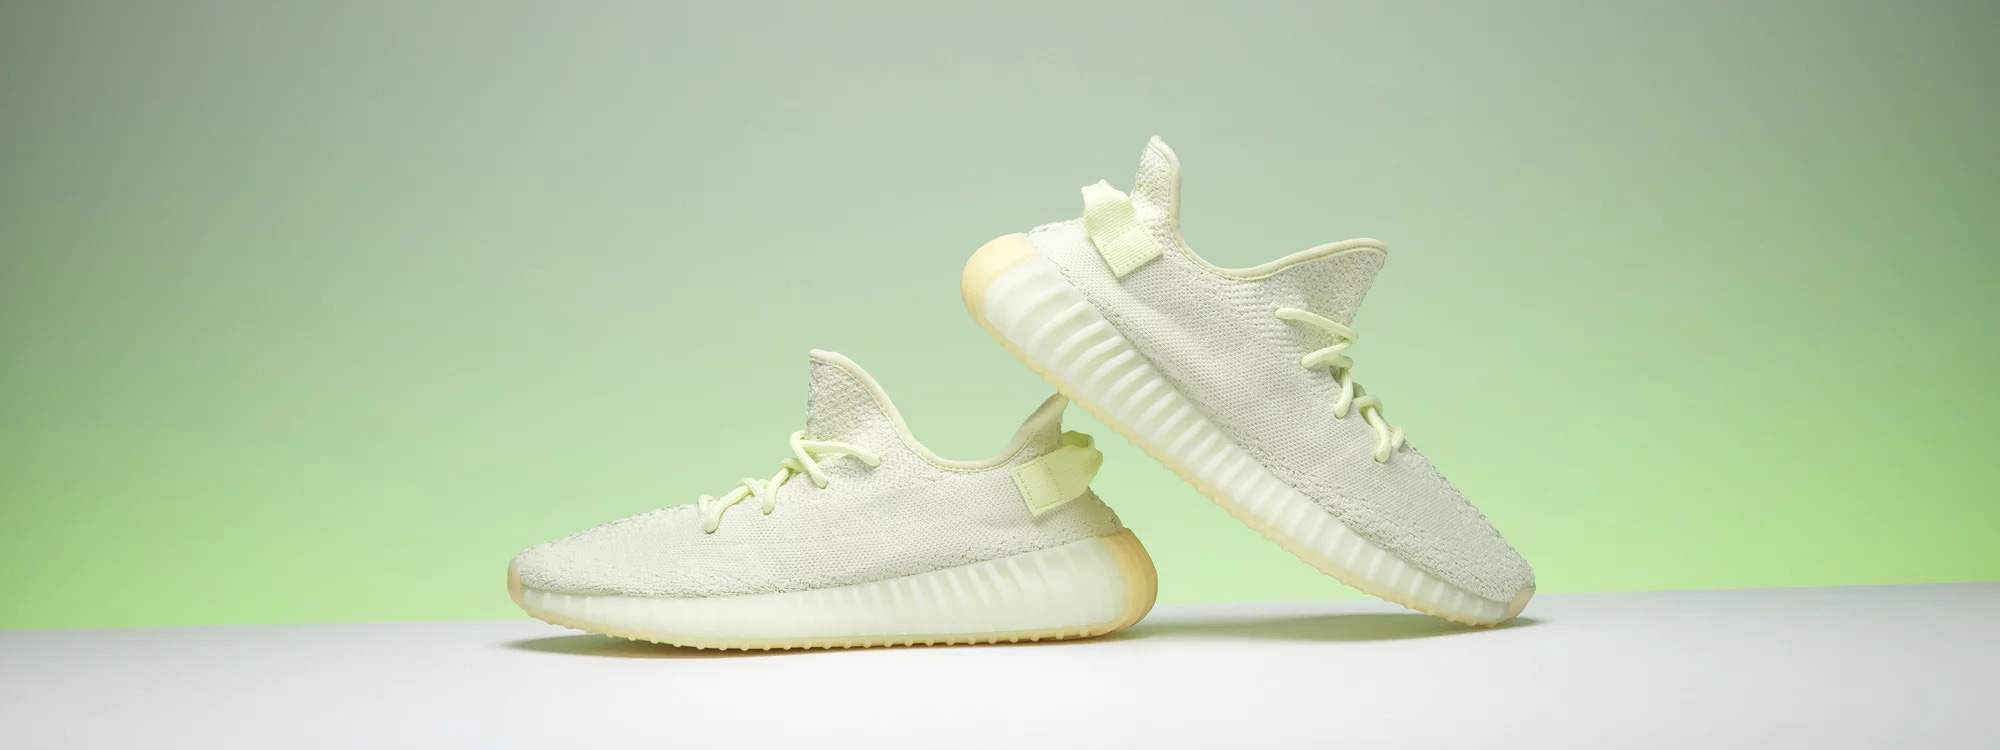 Order The best Adidas Yeezy Boost 350 V2 Butter sneakers